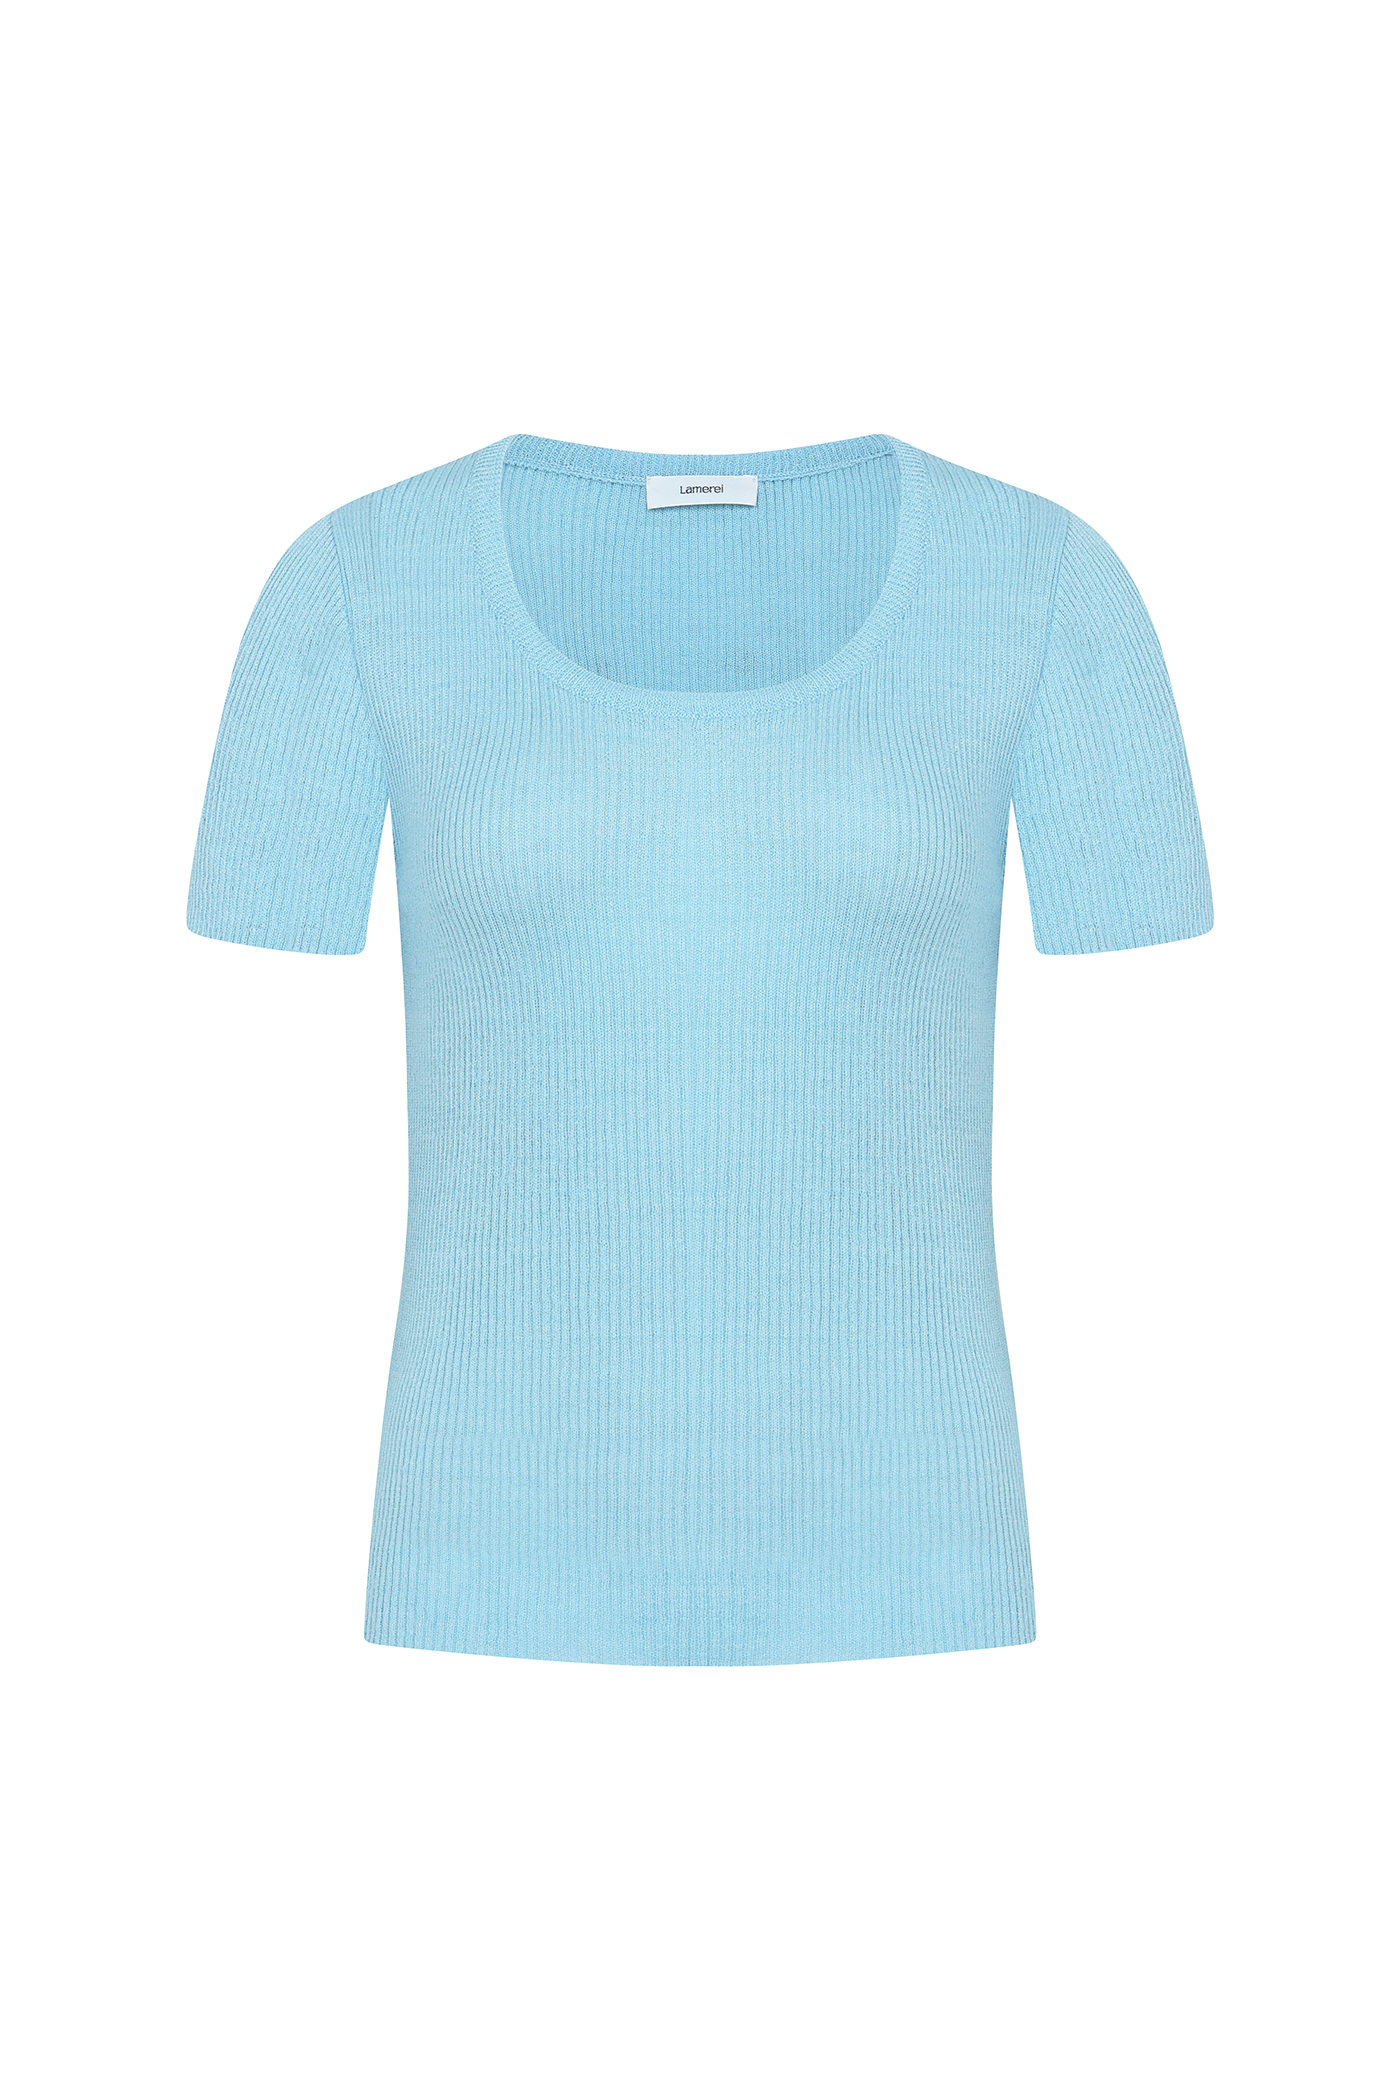 Linen Ribbed U-neck Knit Top[LMBCSUKN196]-4color